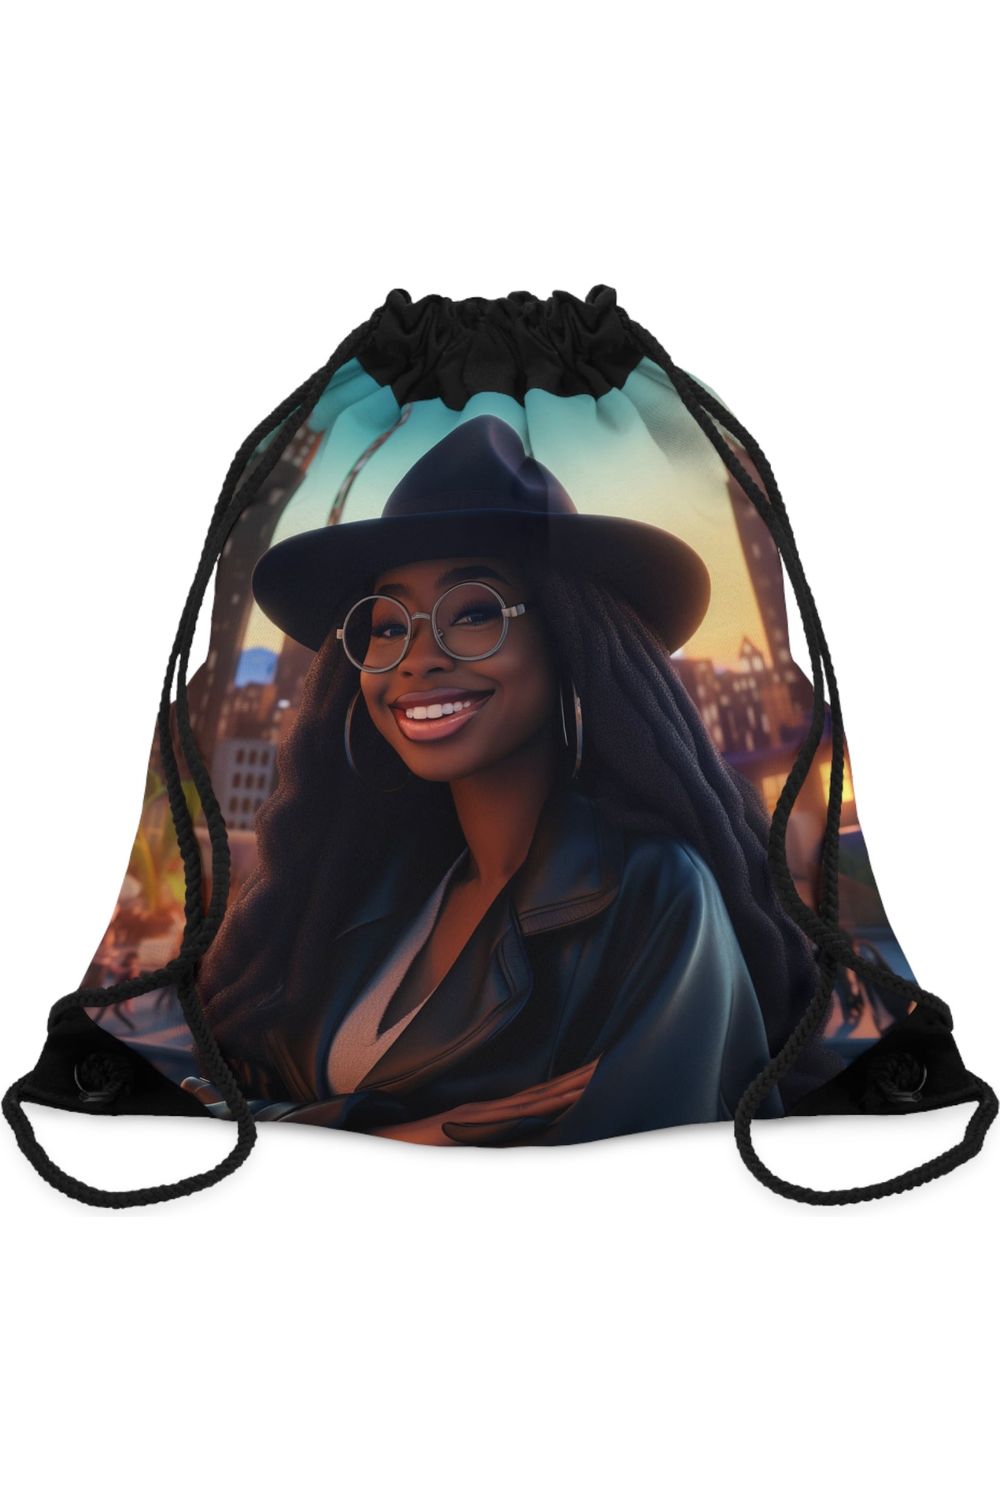 African American Girl with Glasses Drawstring Bag - NicholesGifts.online